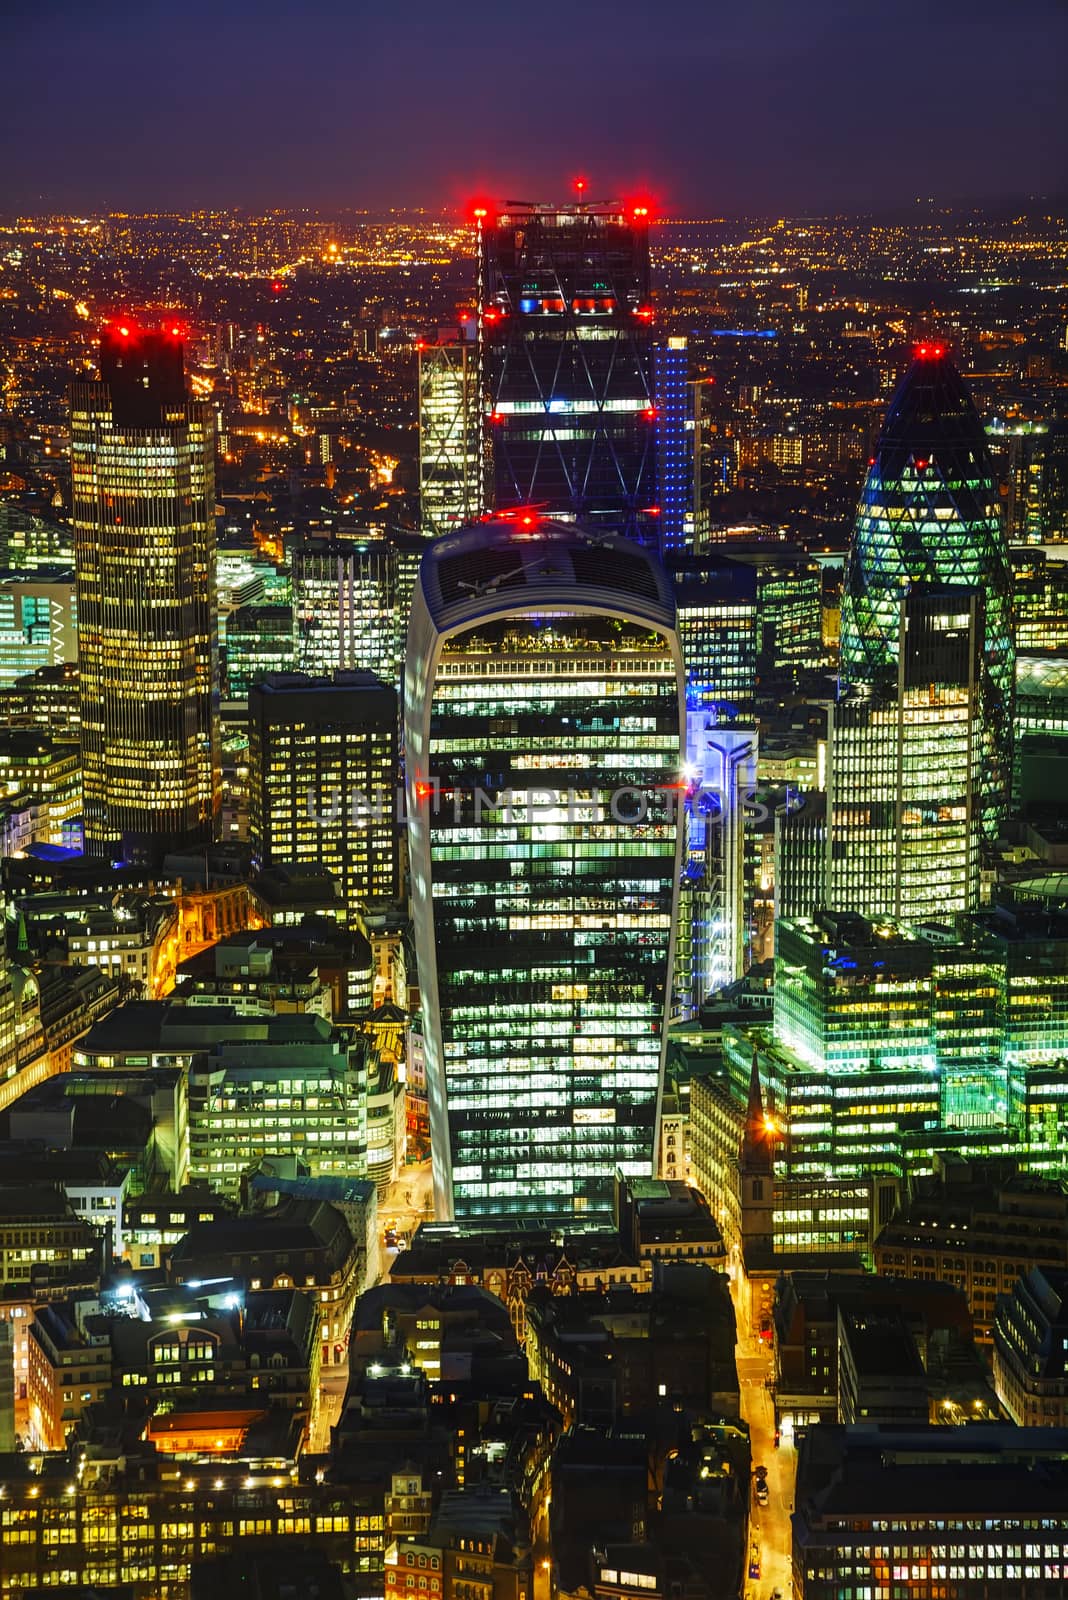 Aerial overview of the City of London financial ddistrict at night